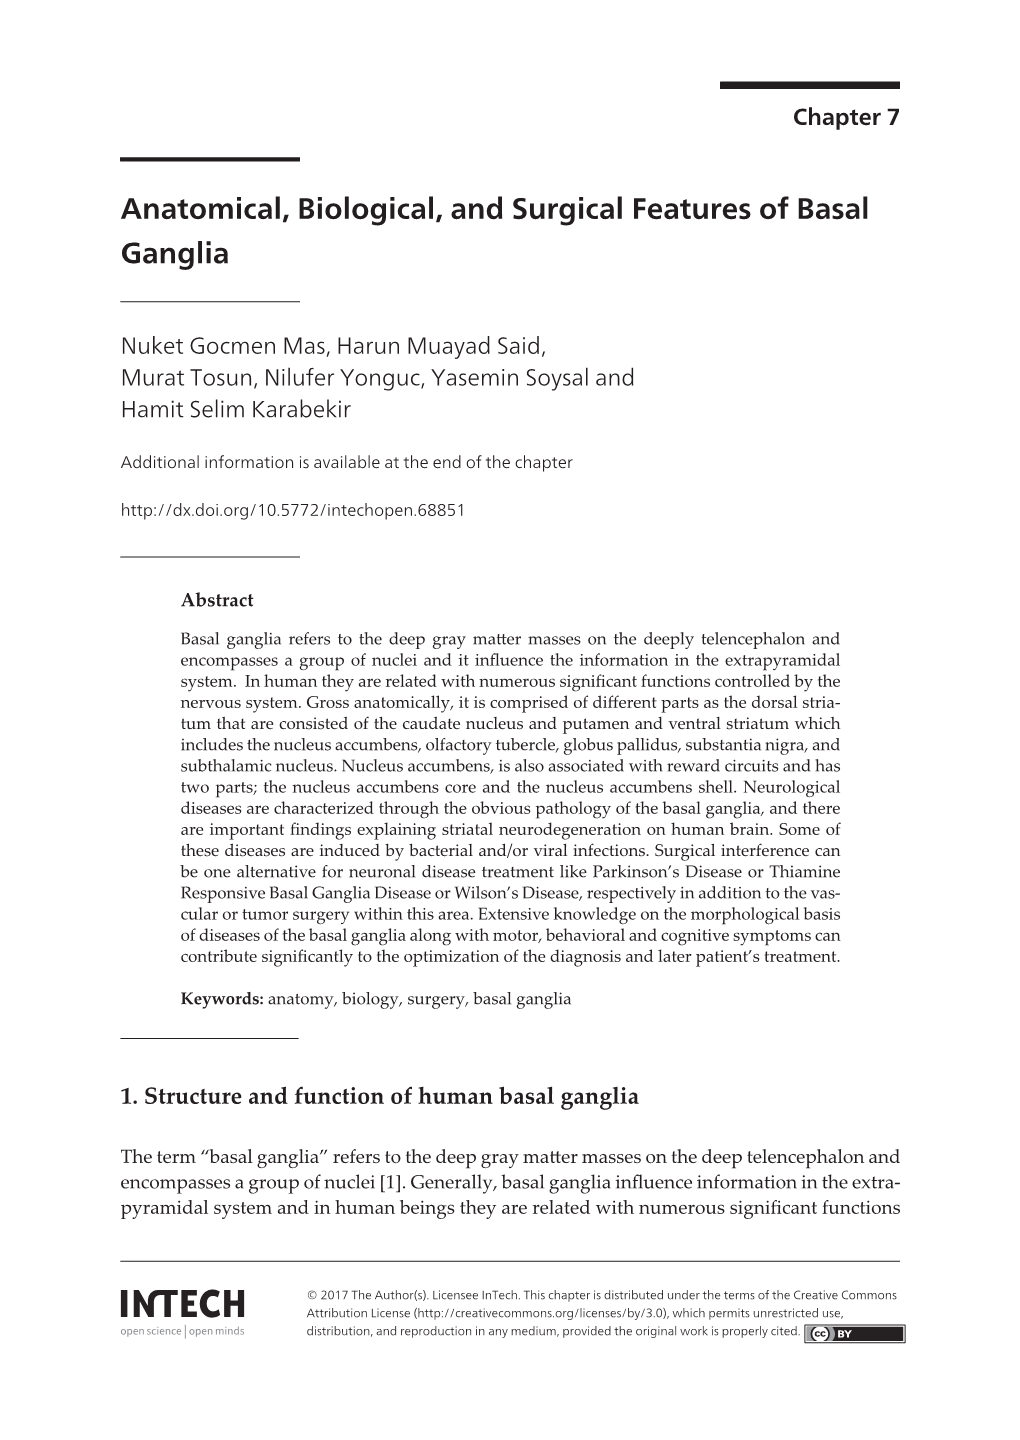 Anatomical, Biological, and Surgical Features of Basal Gangliaanatomical, Biological, and Surgical Features of Basal Ganglia